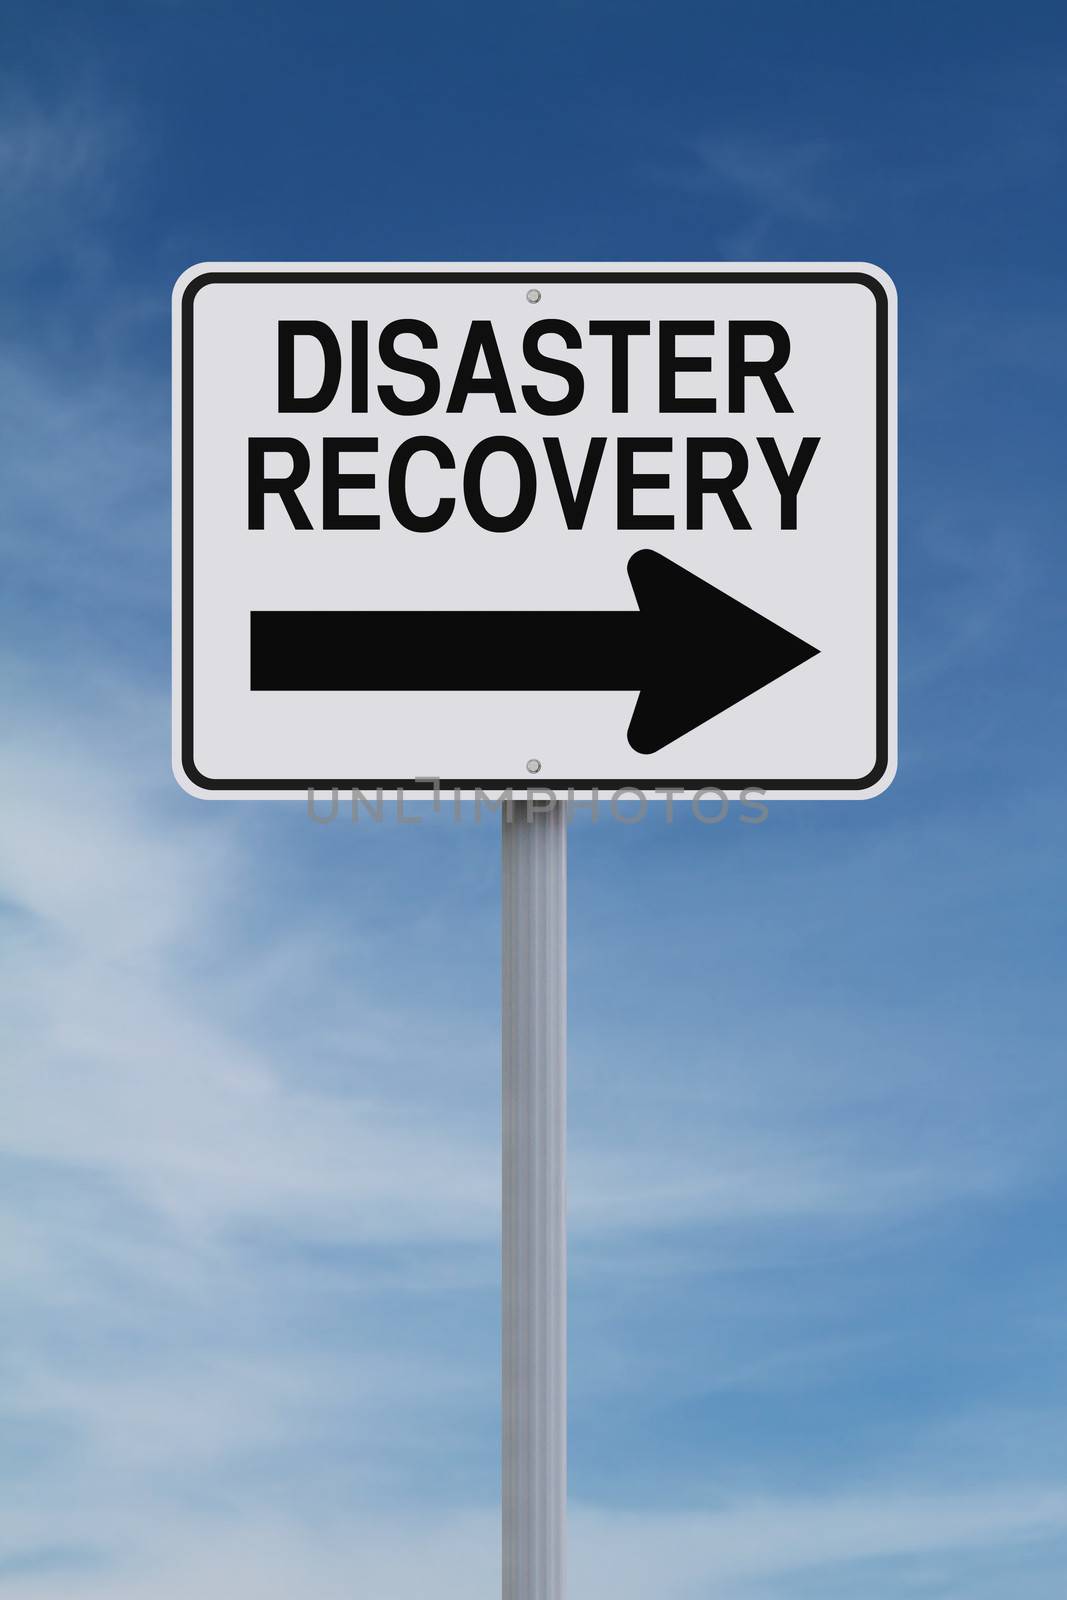 Disaster Recovery by rnl